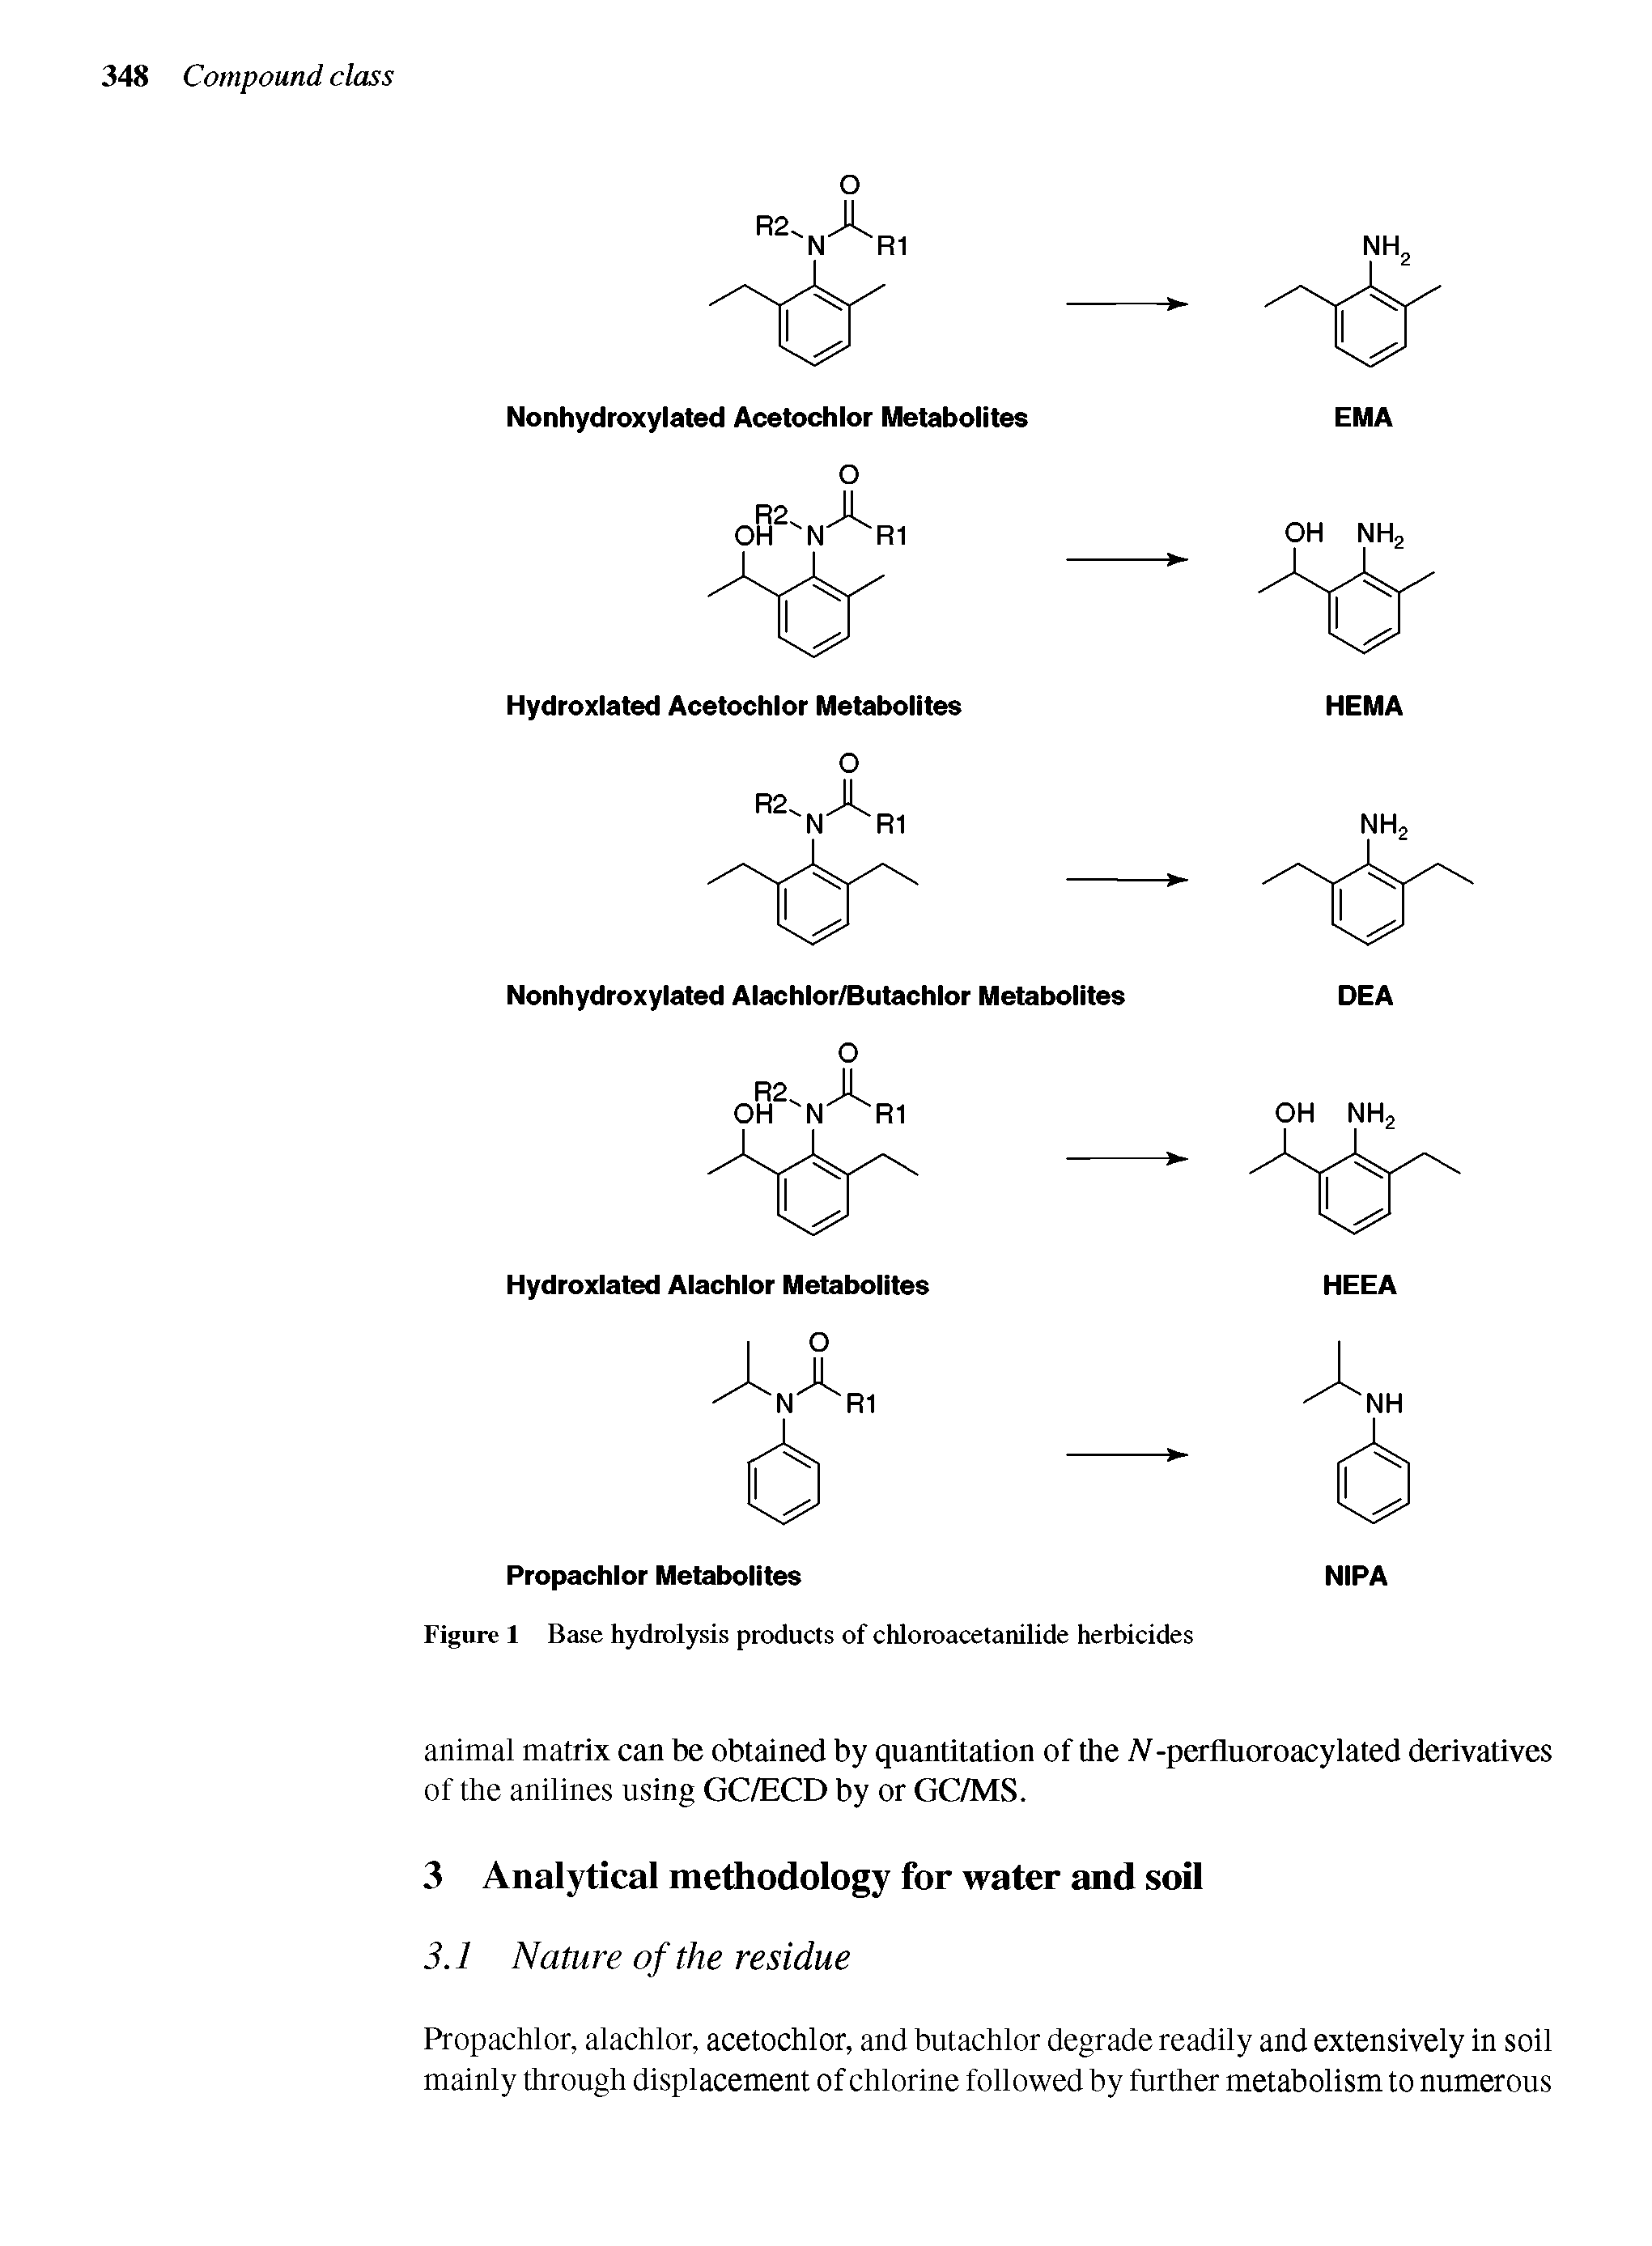 Figure 1 Base hydrolysis products of chloroacetanilide herbicides...